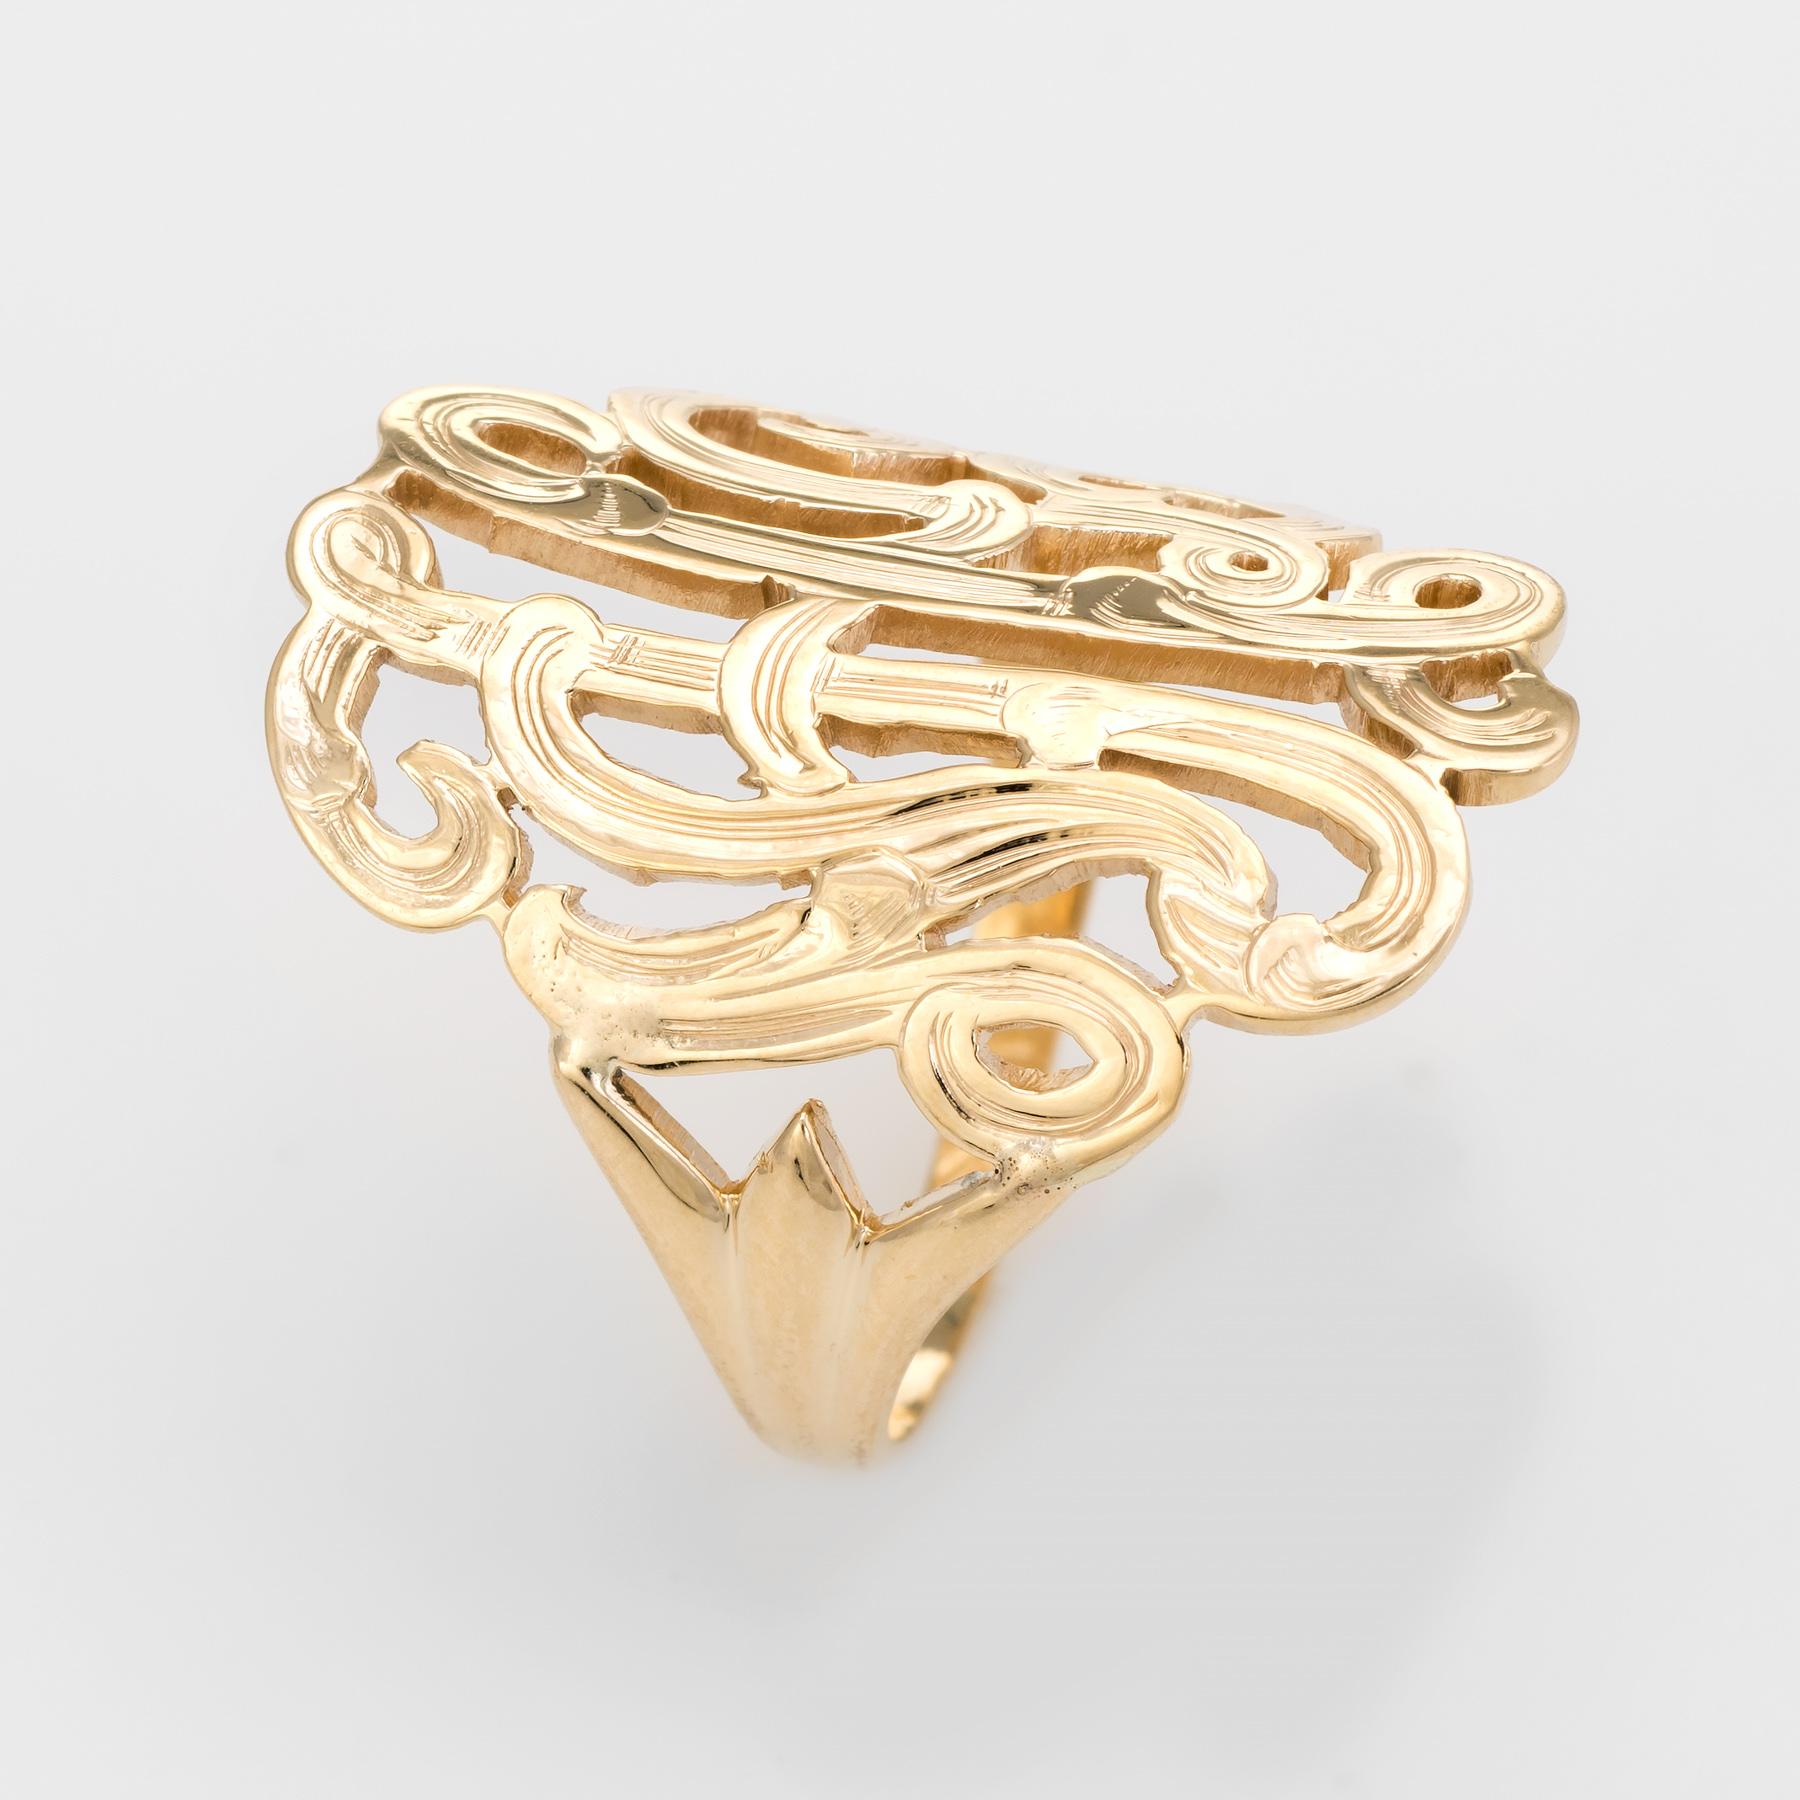 Finely detailed wide band ring (circa 1960s to 1970s), crafted in 14 karat yellow gold. 

The wide (1 inch) mount features a bold and distinct scrolled design. The ring sits flat on the finger.

The ring is in excellent condition.